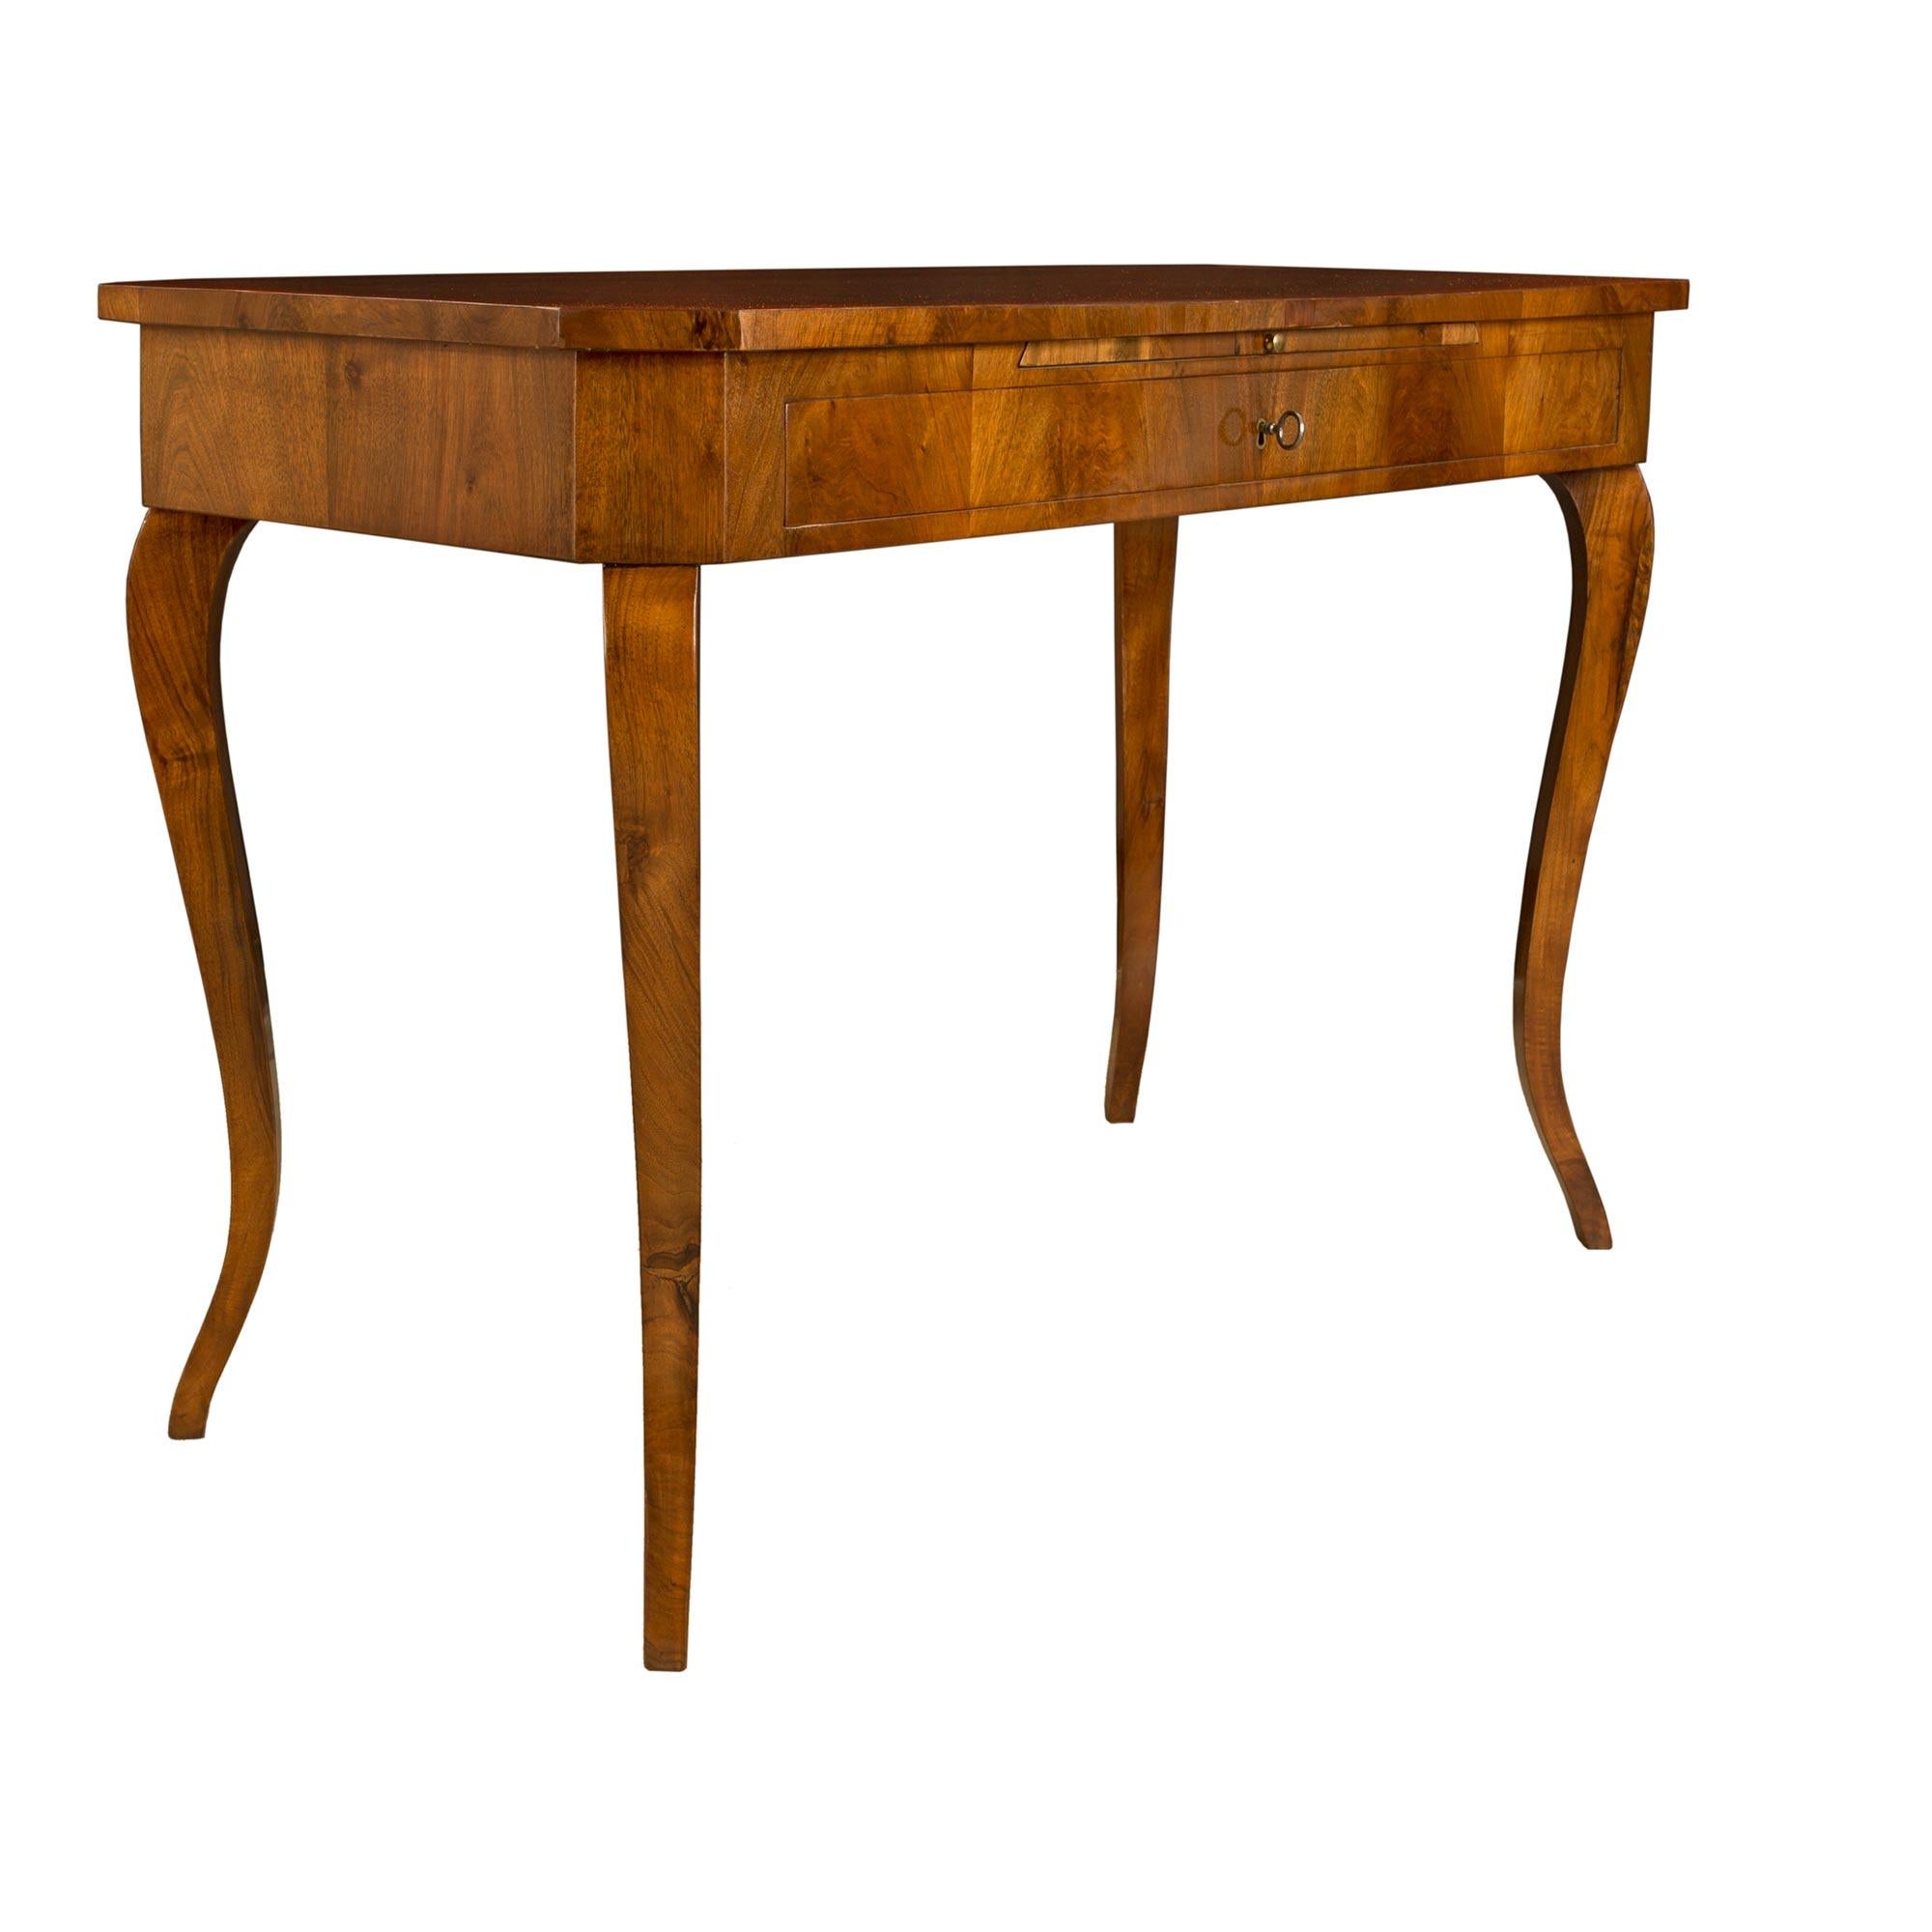 Ivory Italian 18th Century Louis XV Period Walnut, Rosewood and Bone Desk For Sale